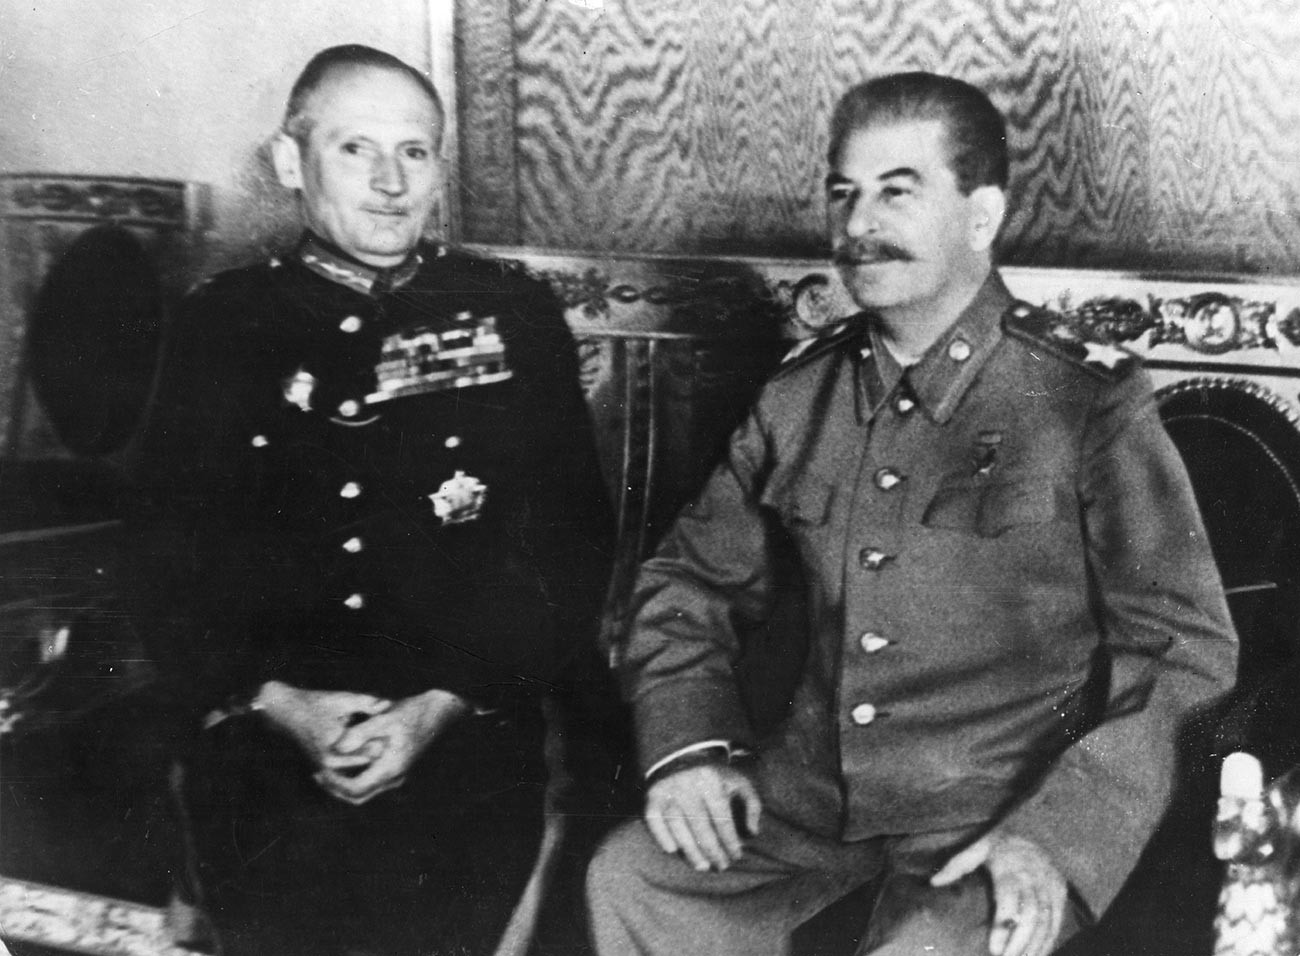 English soldier Field Marshal Bernard L. Montgomery (wearing his Order of Victory) and Joseph Stalin